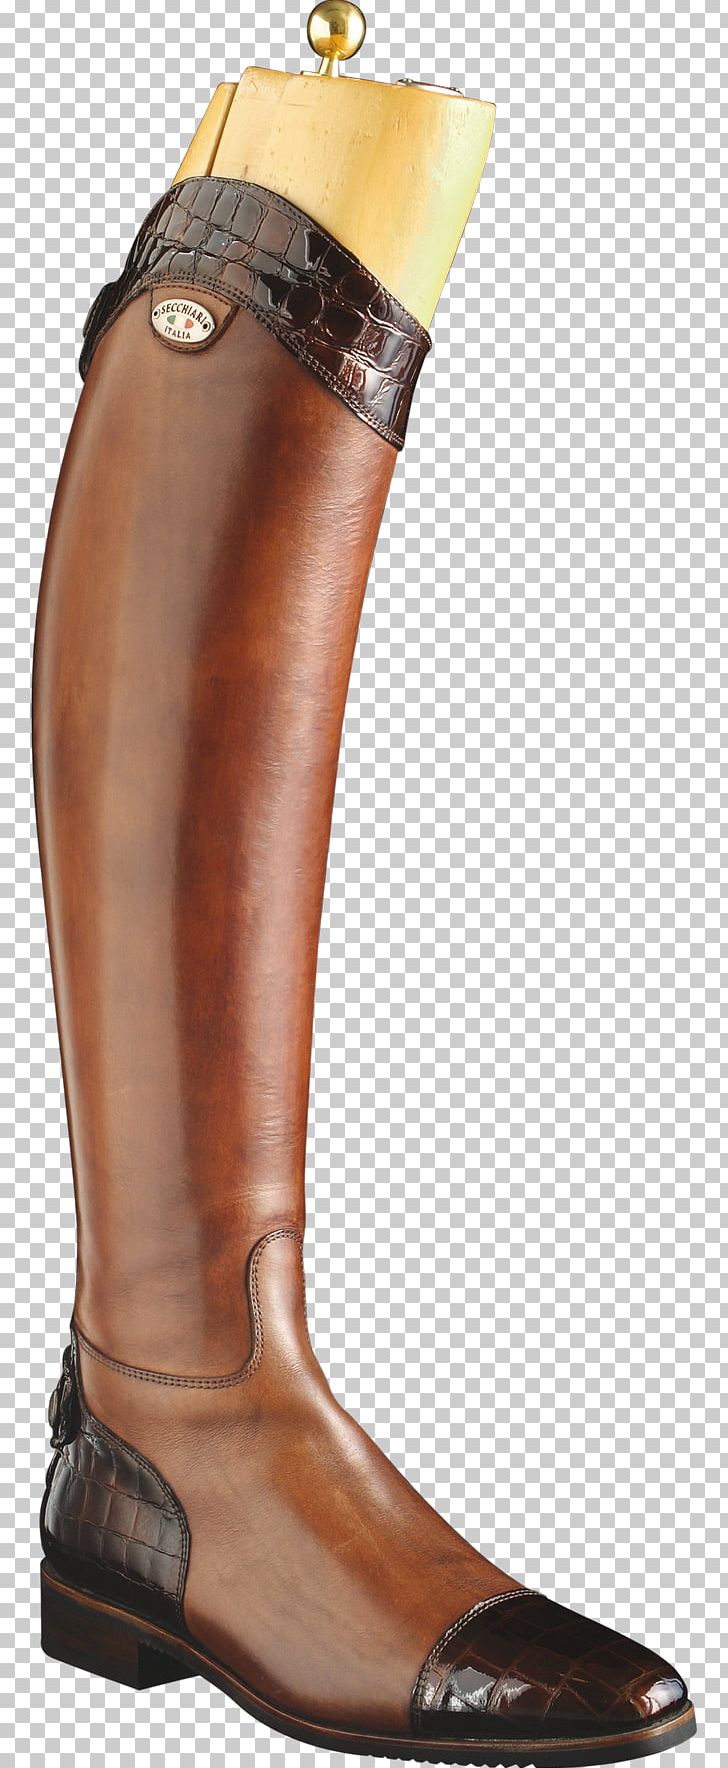 Riding Boot Knee-high Boot Horse Equestrian PNG, Clipart, Accessories, Boot, Boots, Chaps, Cowboy Boot Free PNG Download